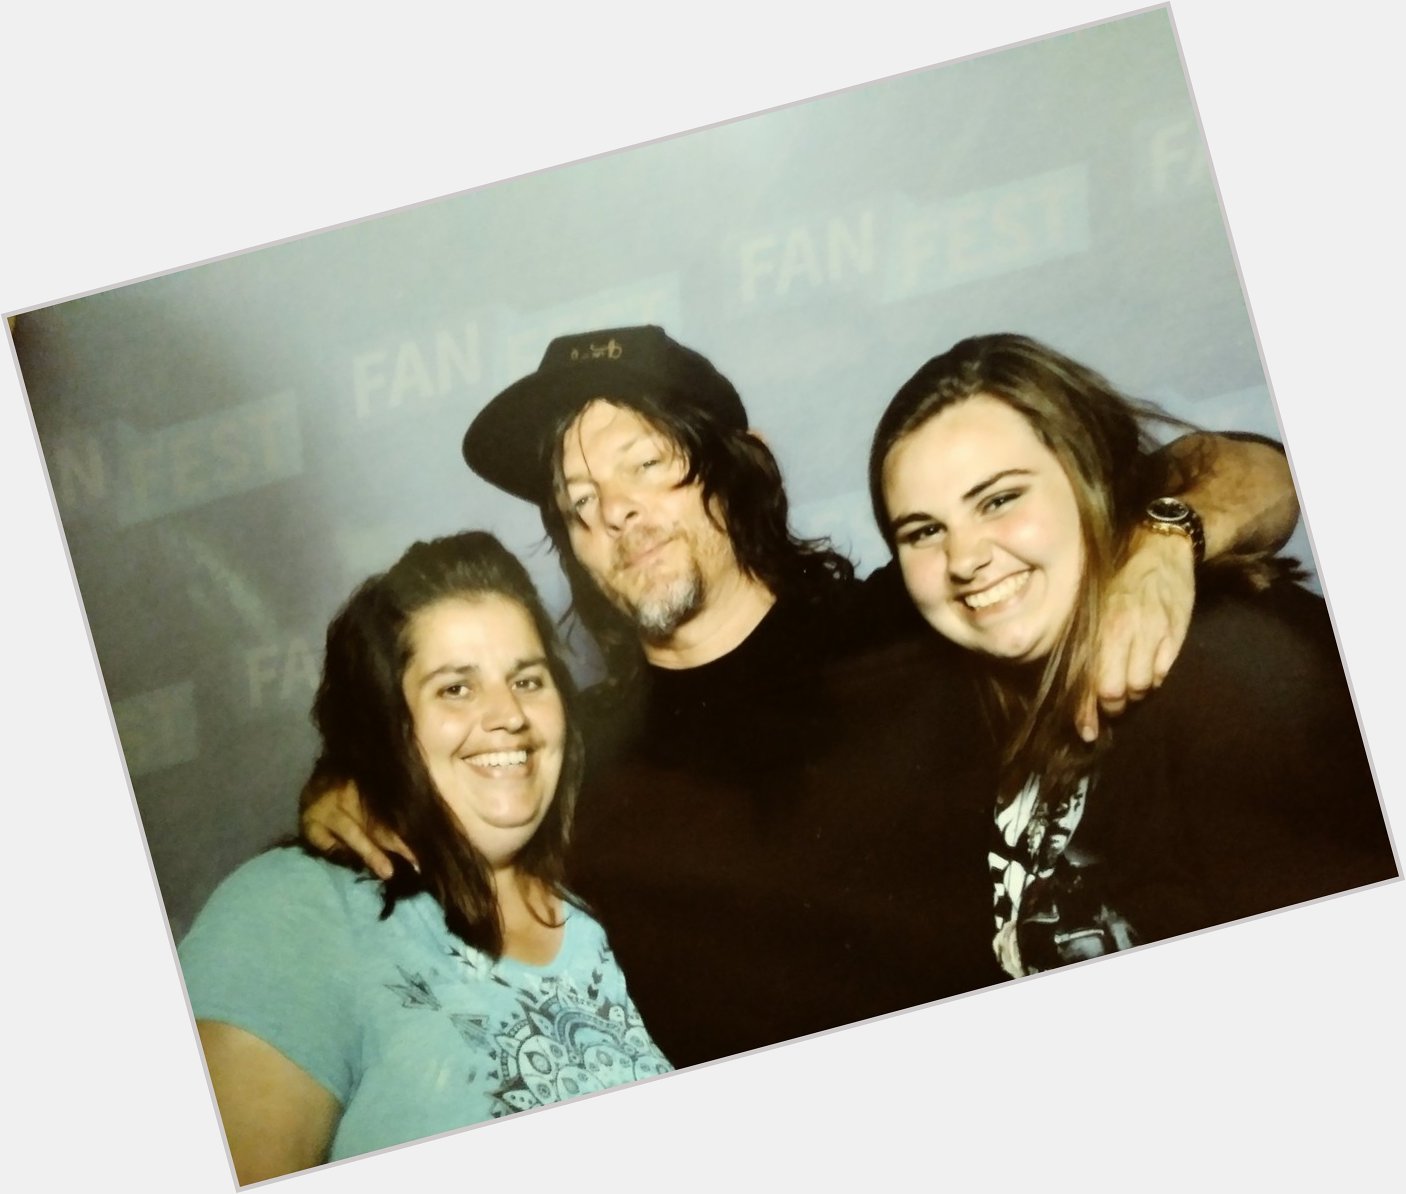 Happy Birthday Reedus!!! Hope its a great day! 